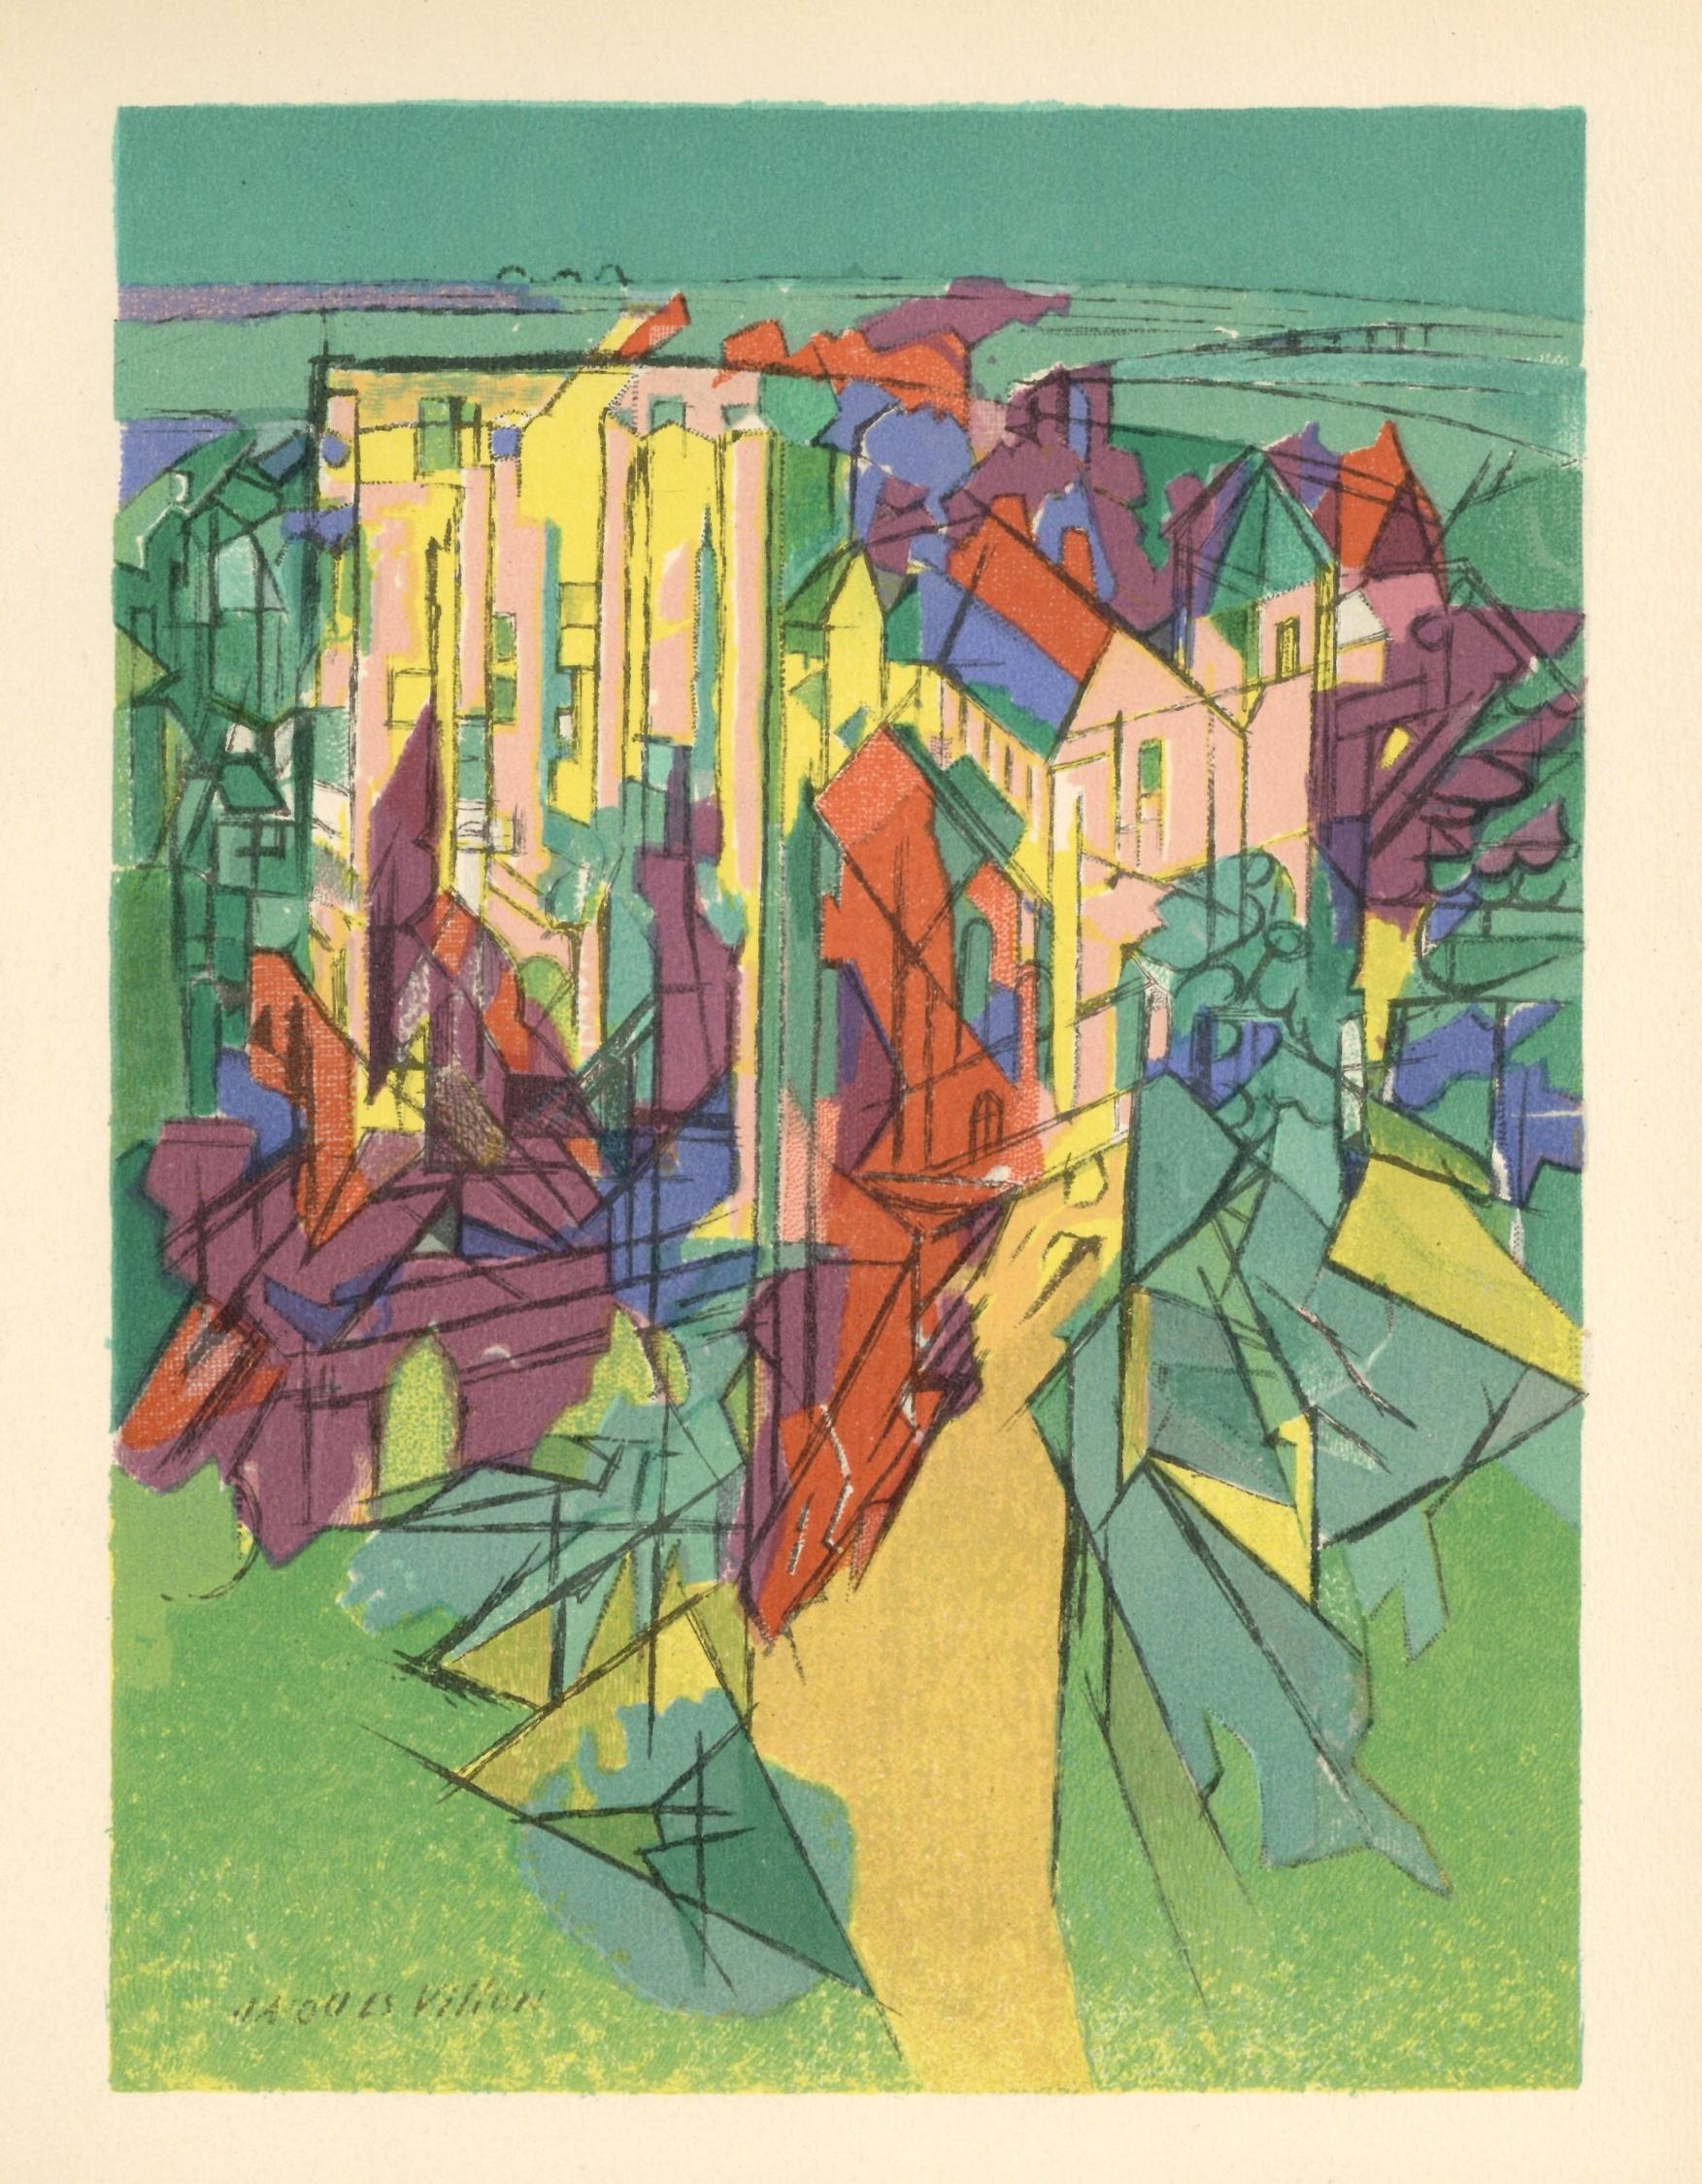 Medium: lithograph (after the painting). Published by Louis Carré in 1948 for "L'Art Glorieux" in an edition of 1800. Printed in Paris by Mourlot Frères. Image size: 8 1/2 x 6 3/8 inches (216 x 160 mm). Signed in the plate (not by hand).